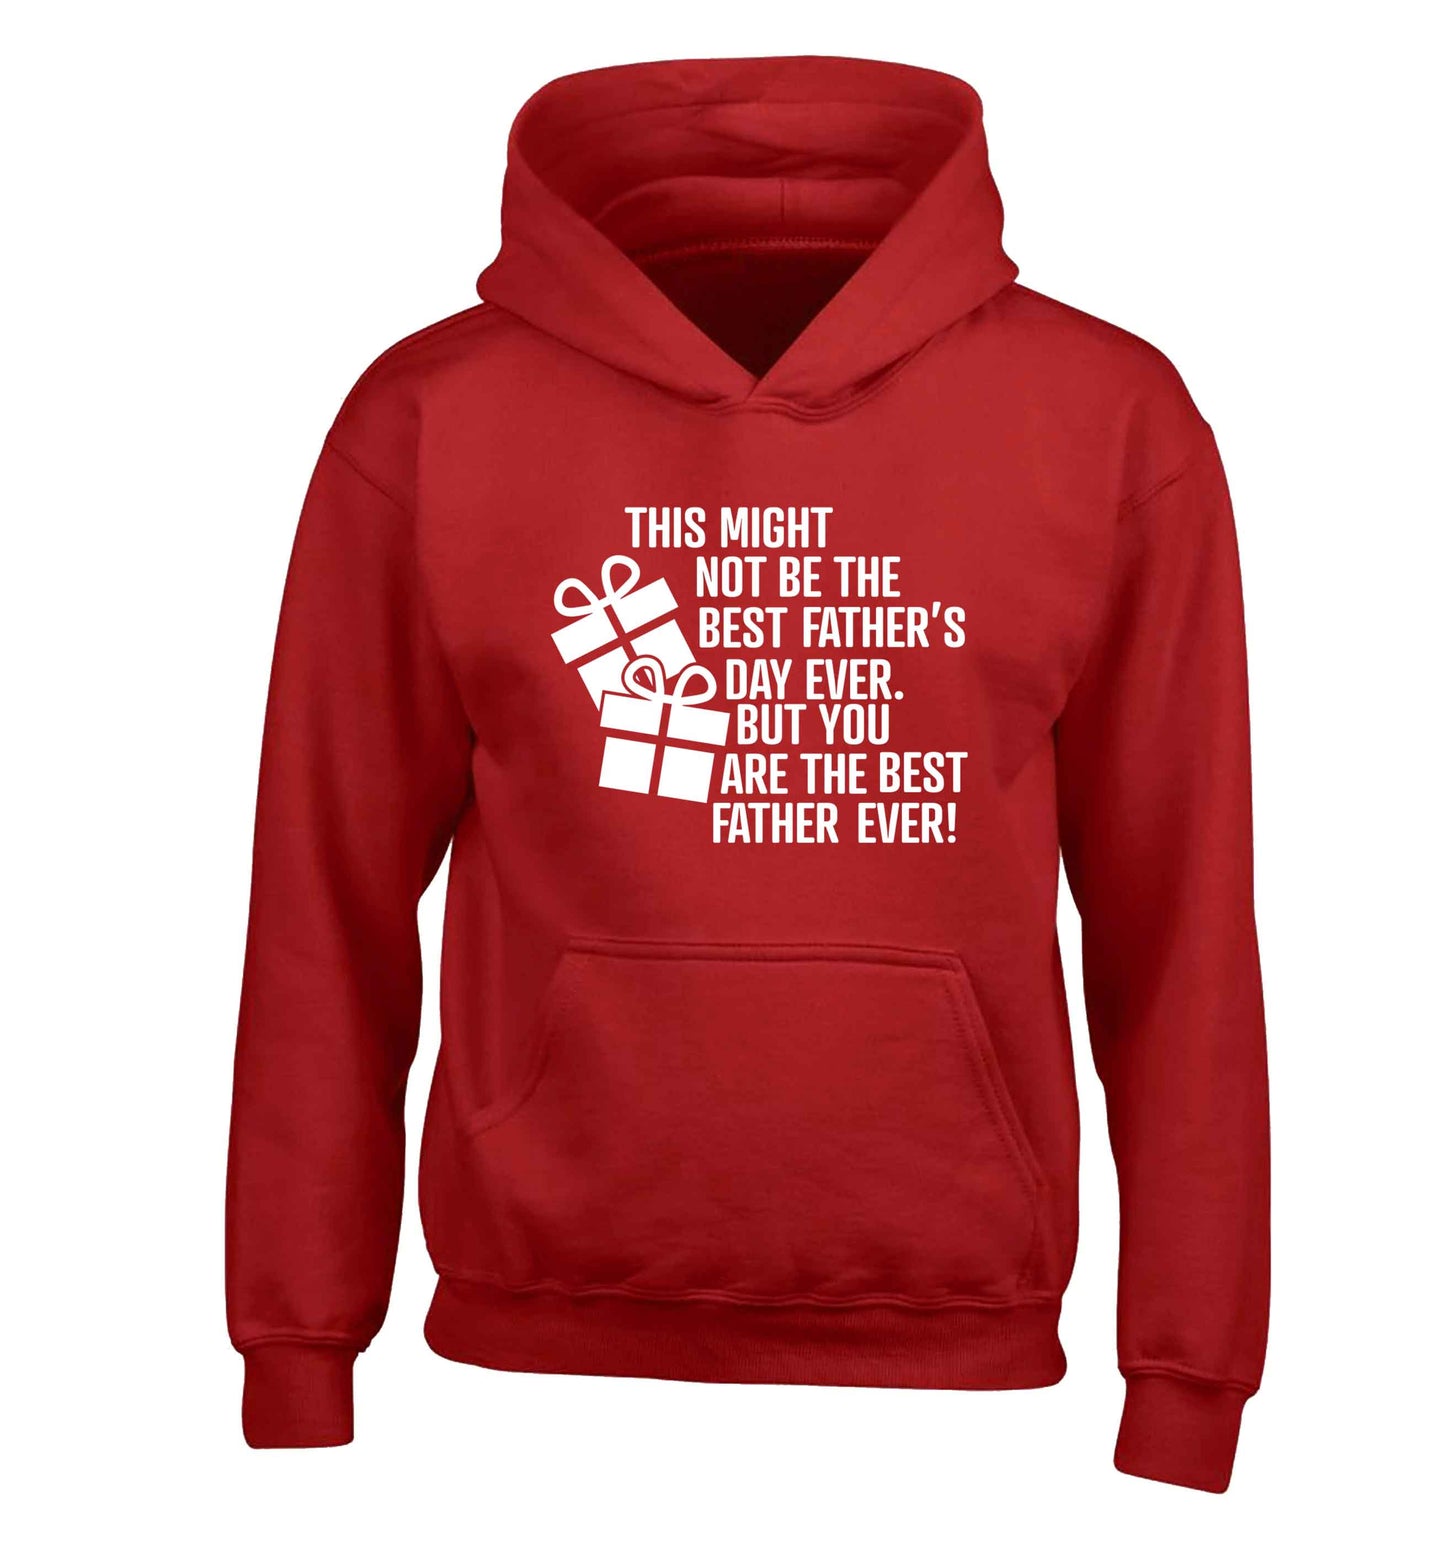 It might not be the best Father's Day ever but you are the best father ever! children's red hoodie 12-13 Years